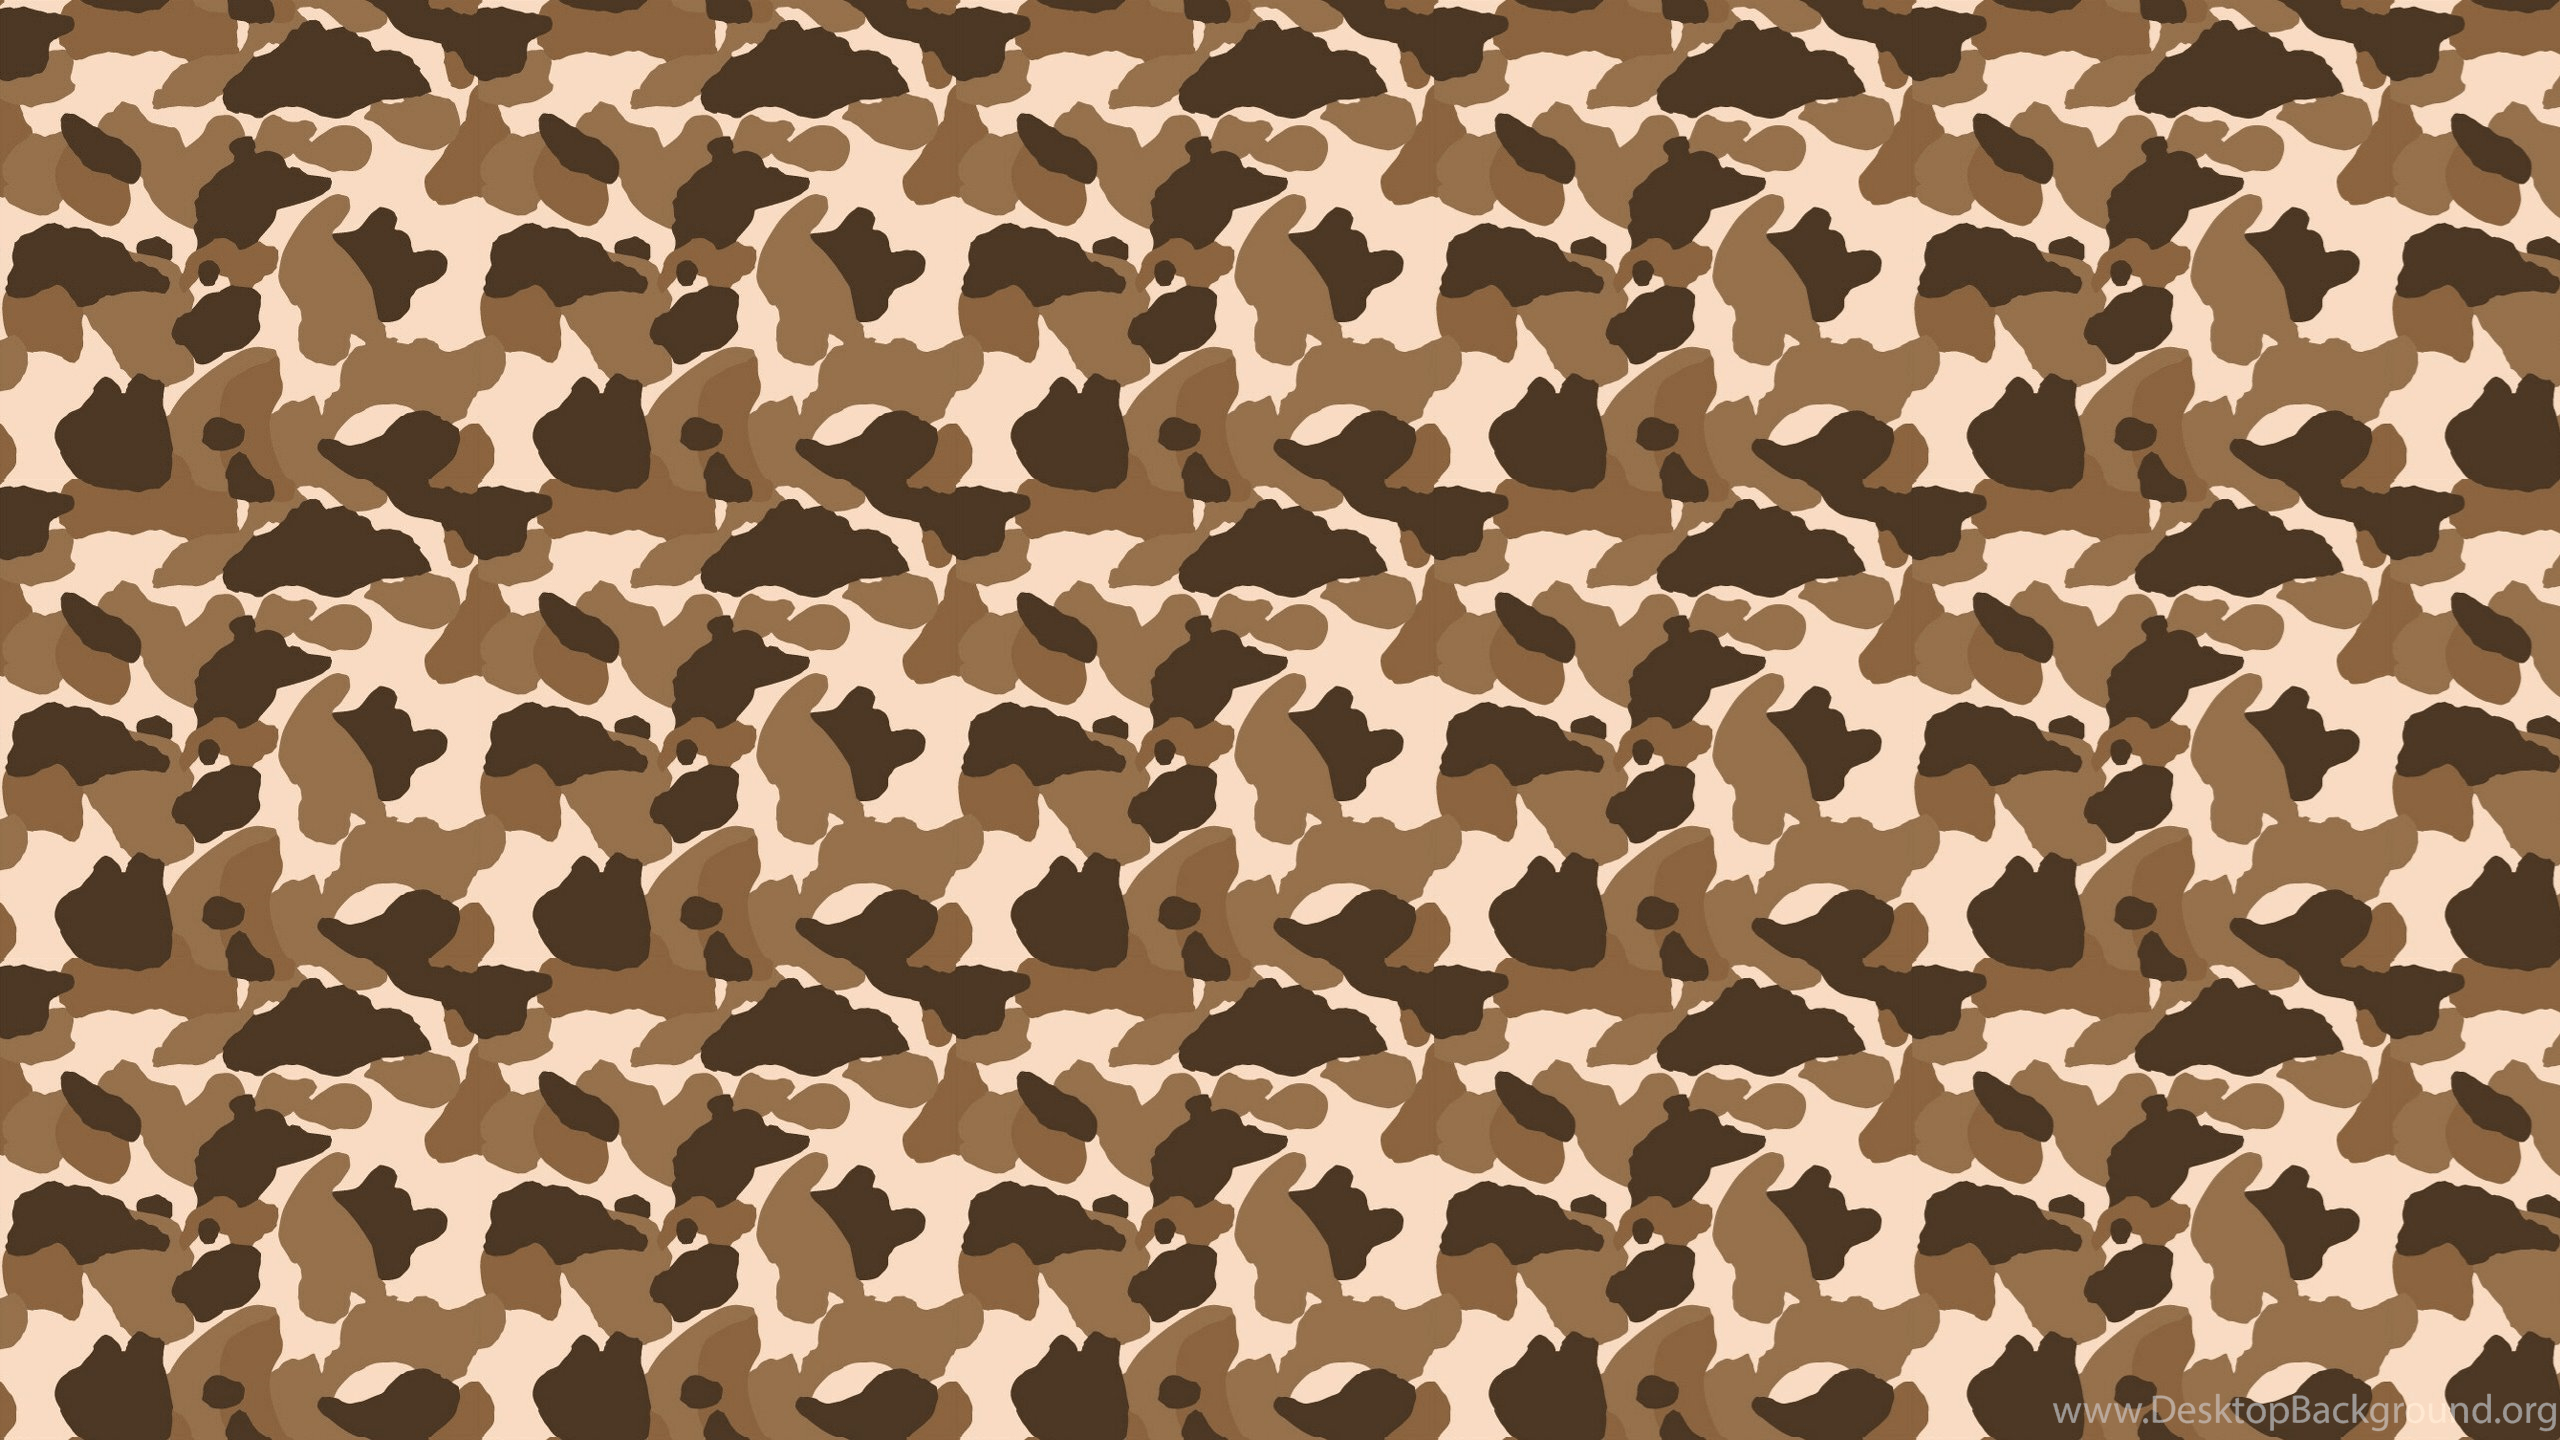 Brown Camo BAPE Logo - Wallpapers Bape Installing This Brown Camo Is Easy Just Save The ...